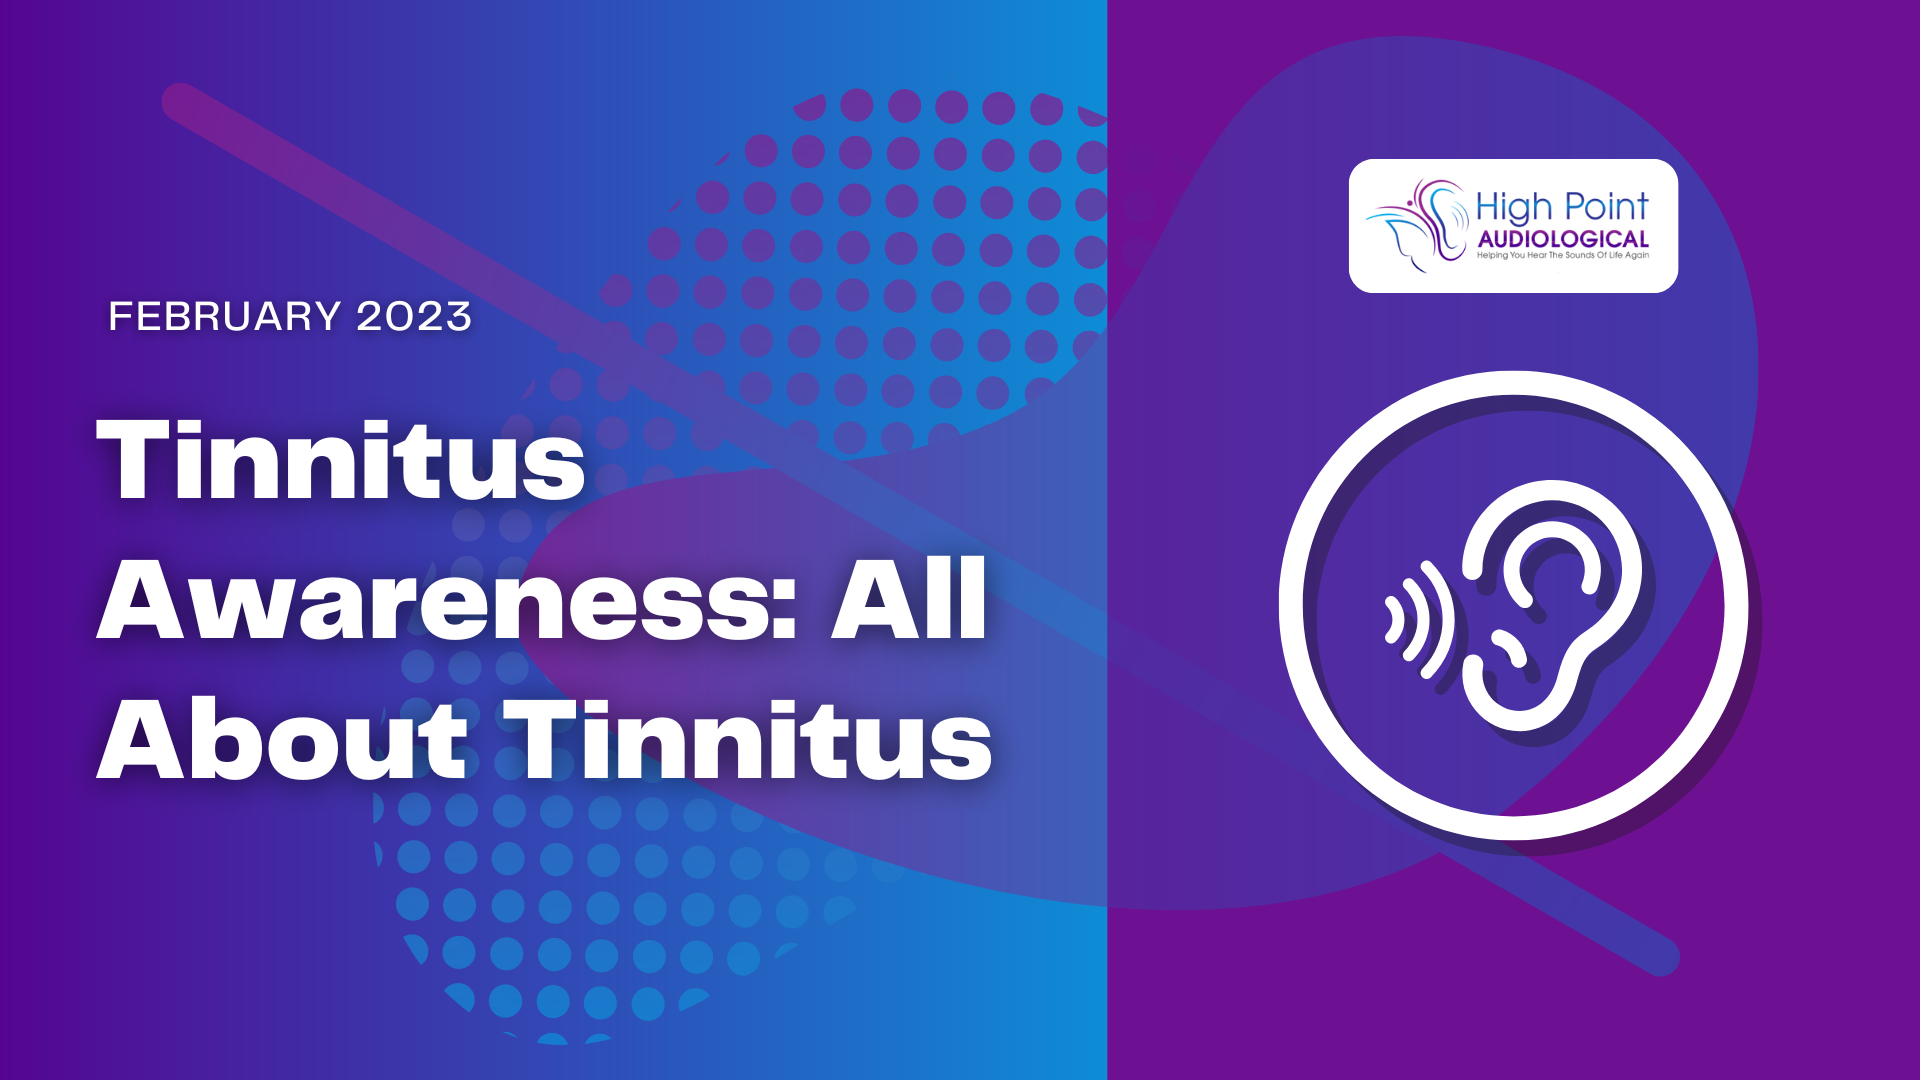 Tinnitus Treatment: Are “Sleigh Bells” Ringing in Your Ears?